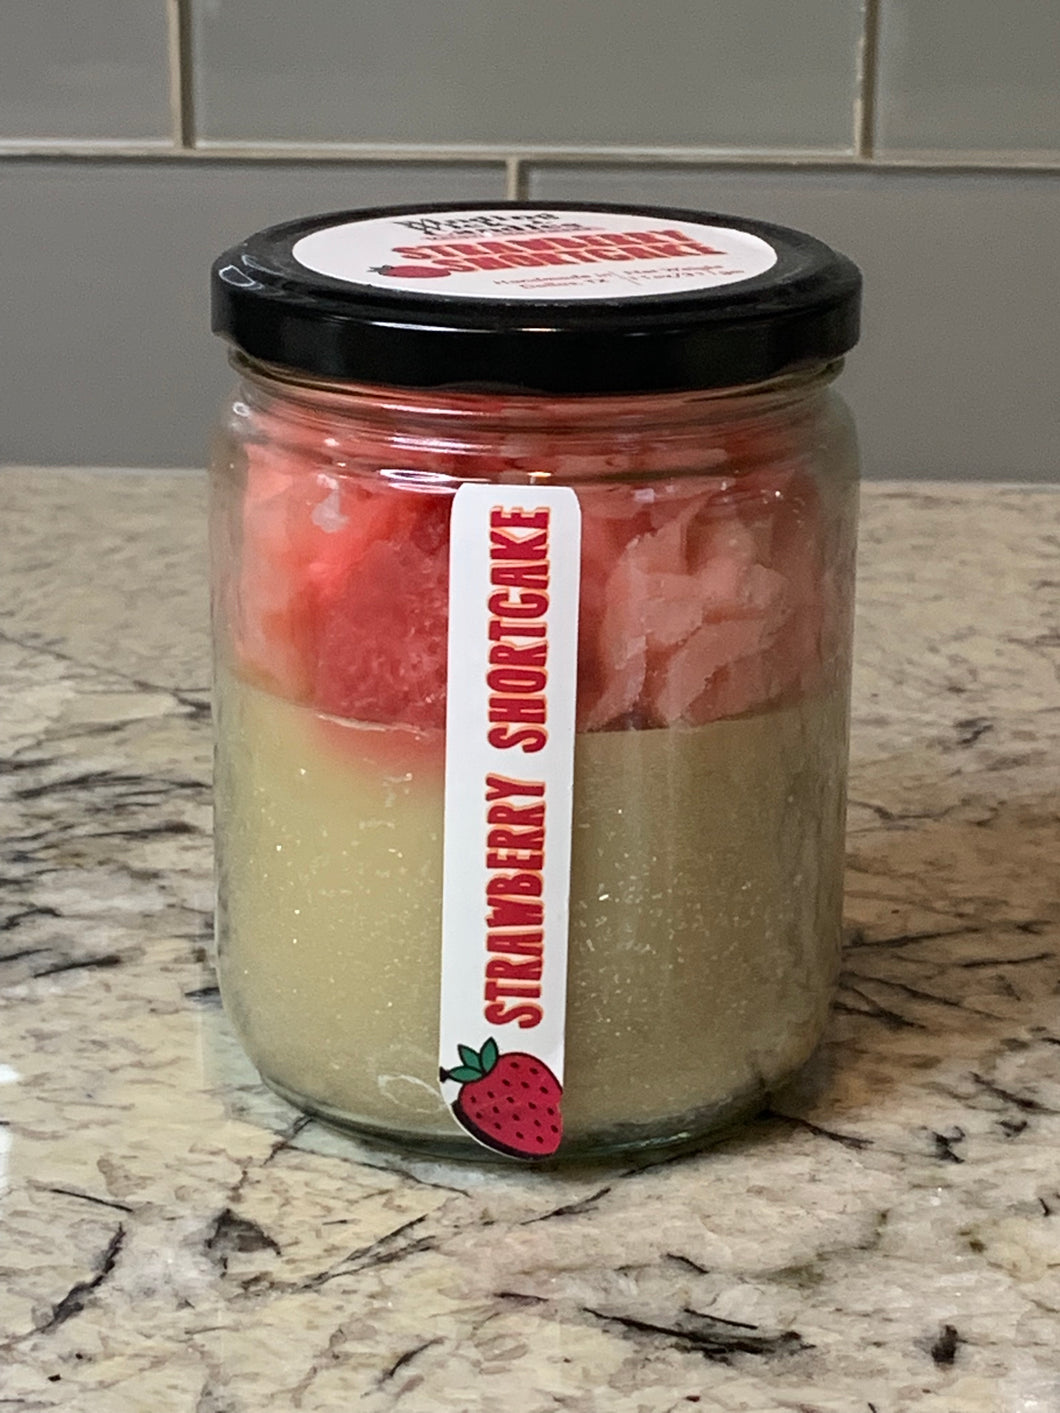 11 oz. Strawberry Shortcake Candle by Winding Wick Candles